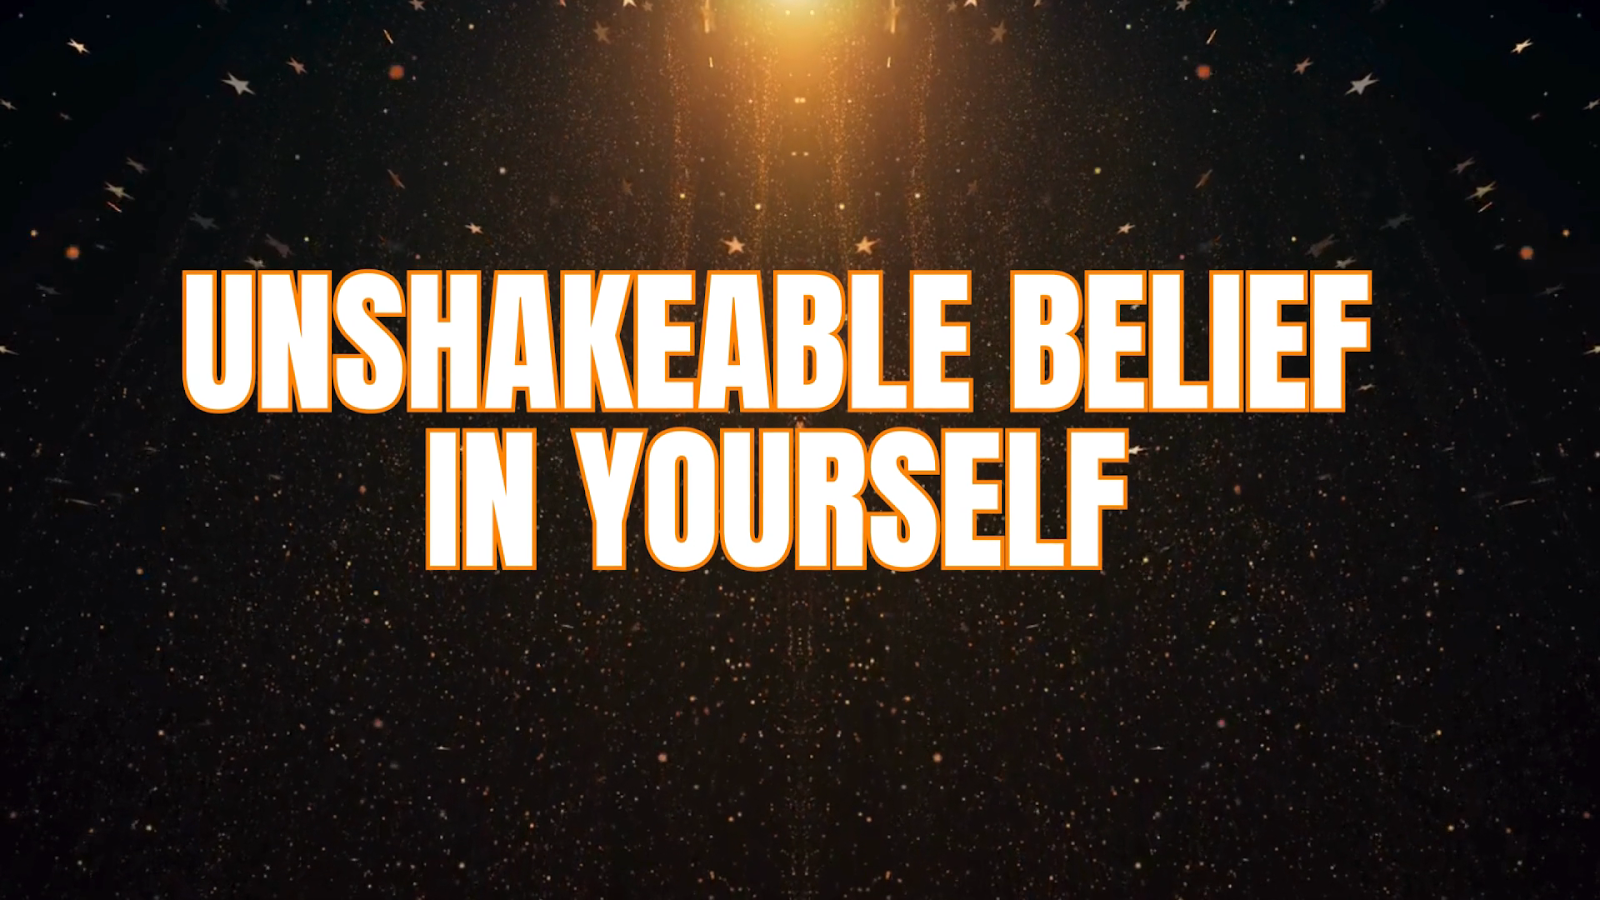 Part of training is having an unshakable belief in yourself